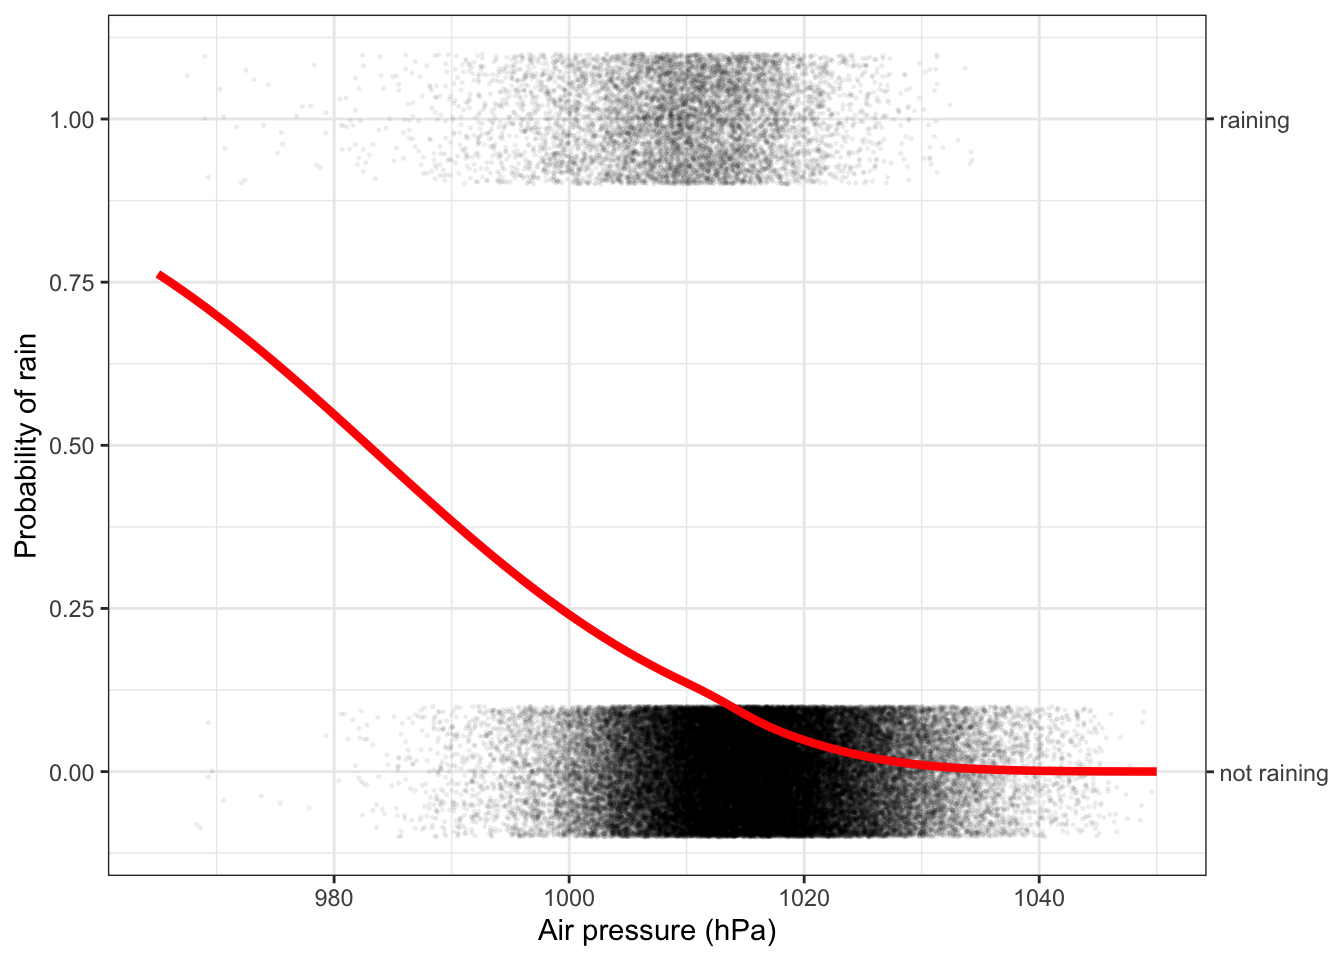 Treating air pressure as a continuous numerical variable turns the model of rain conditioned on air pressure into a smooth function. The logistic function form is appropriate for classifiers, when the function output is a probability, that is, a number between zero and one.